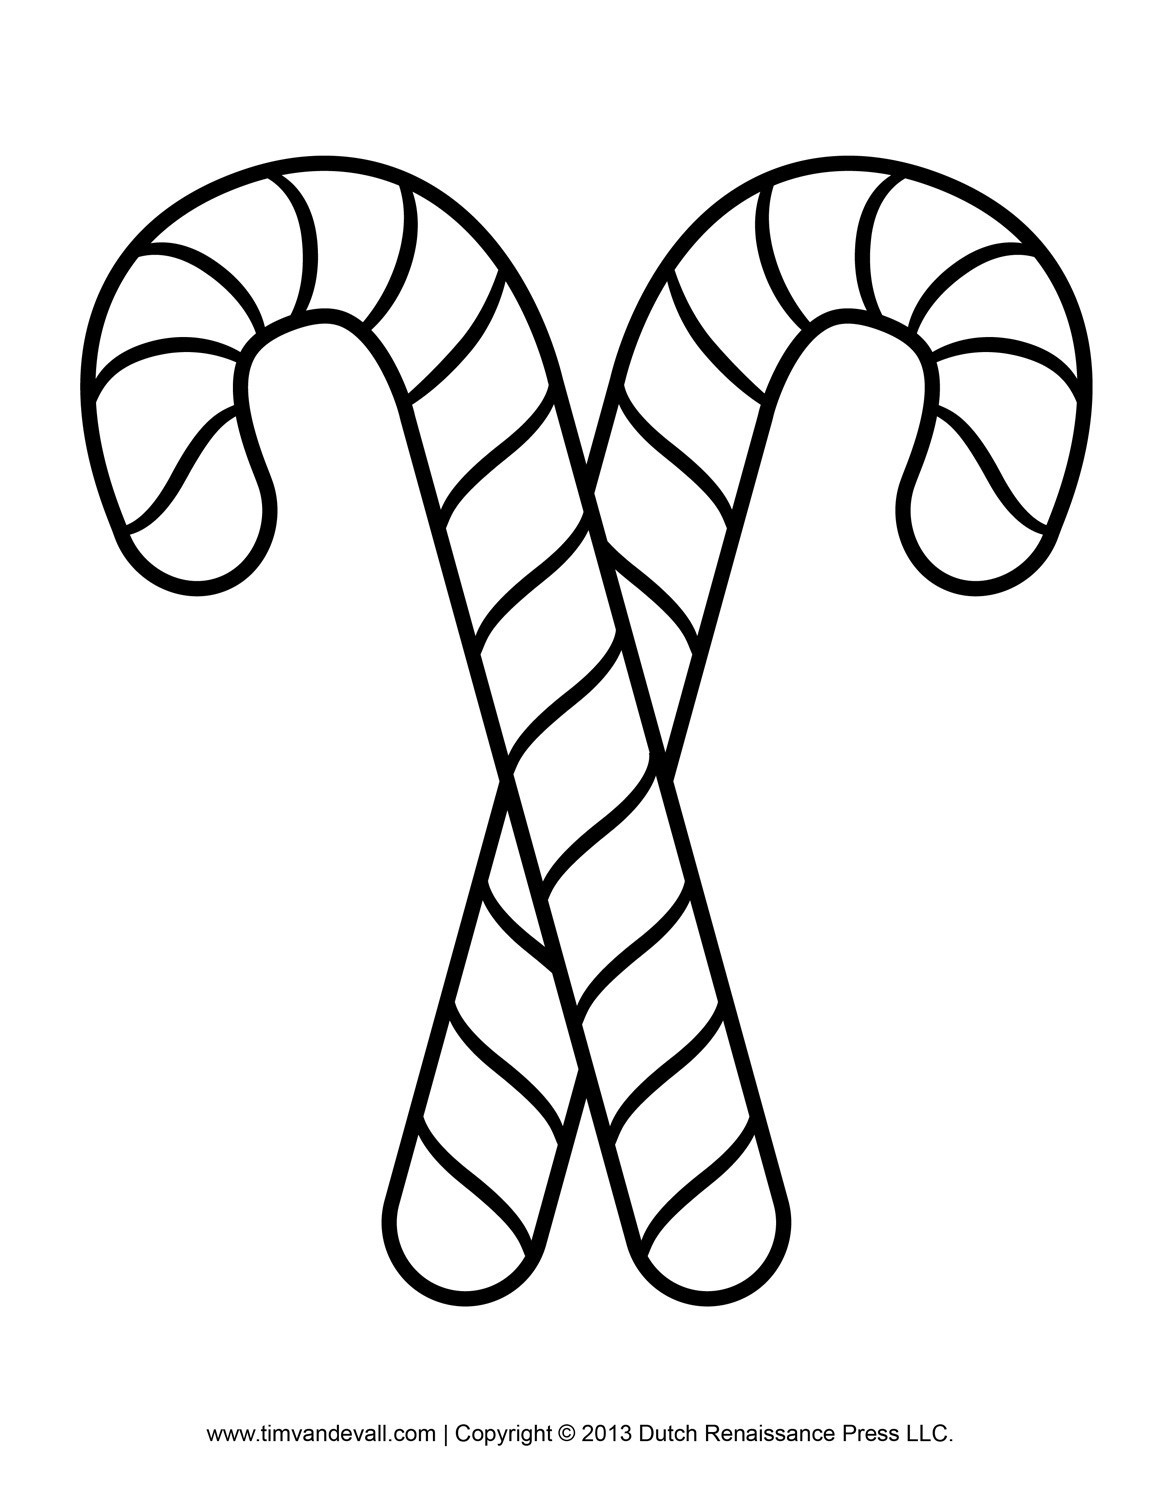 Candy Cane Outline - Homesecurityla - Free Candy Cane Template Printable